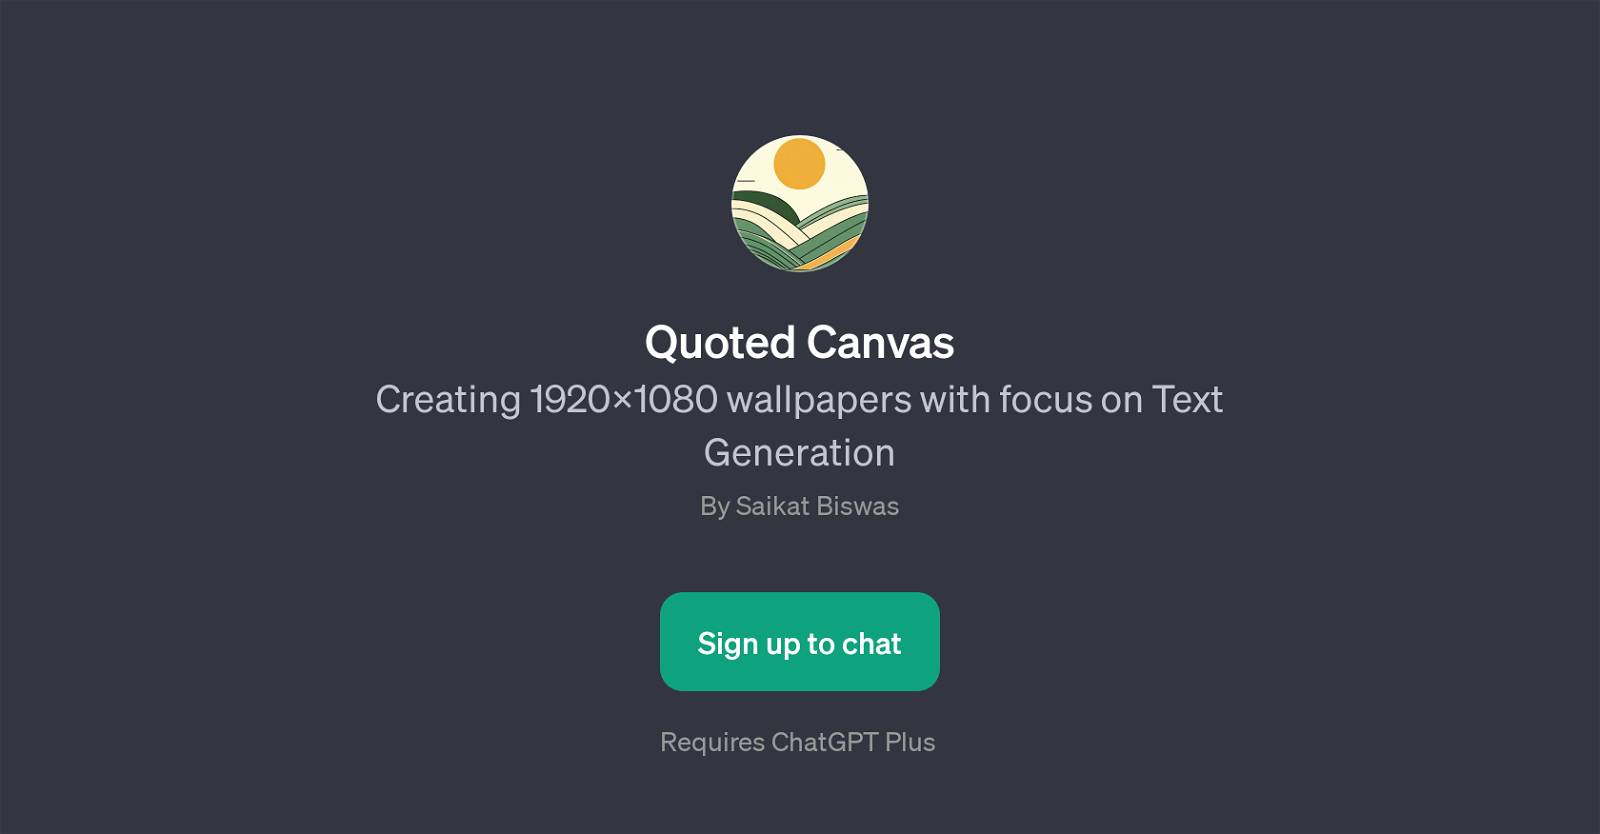 Quoted Canvas website